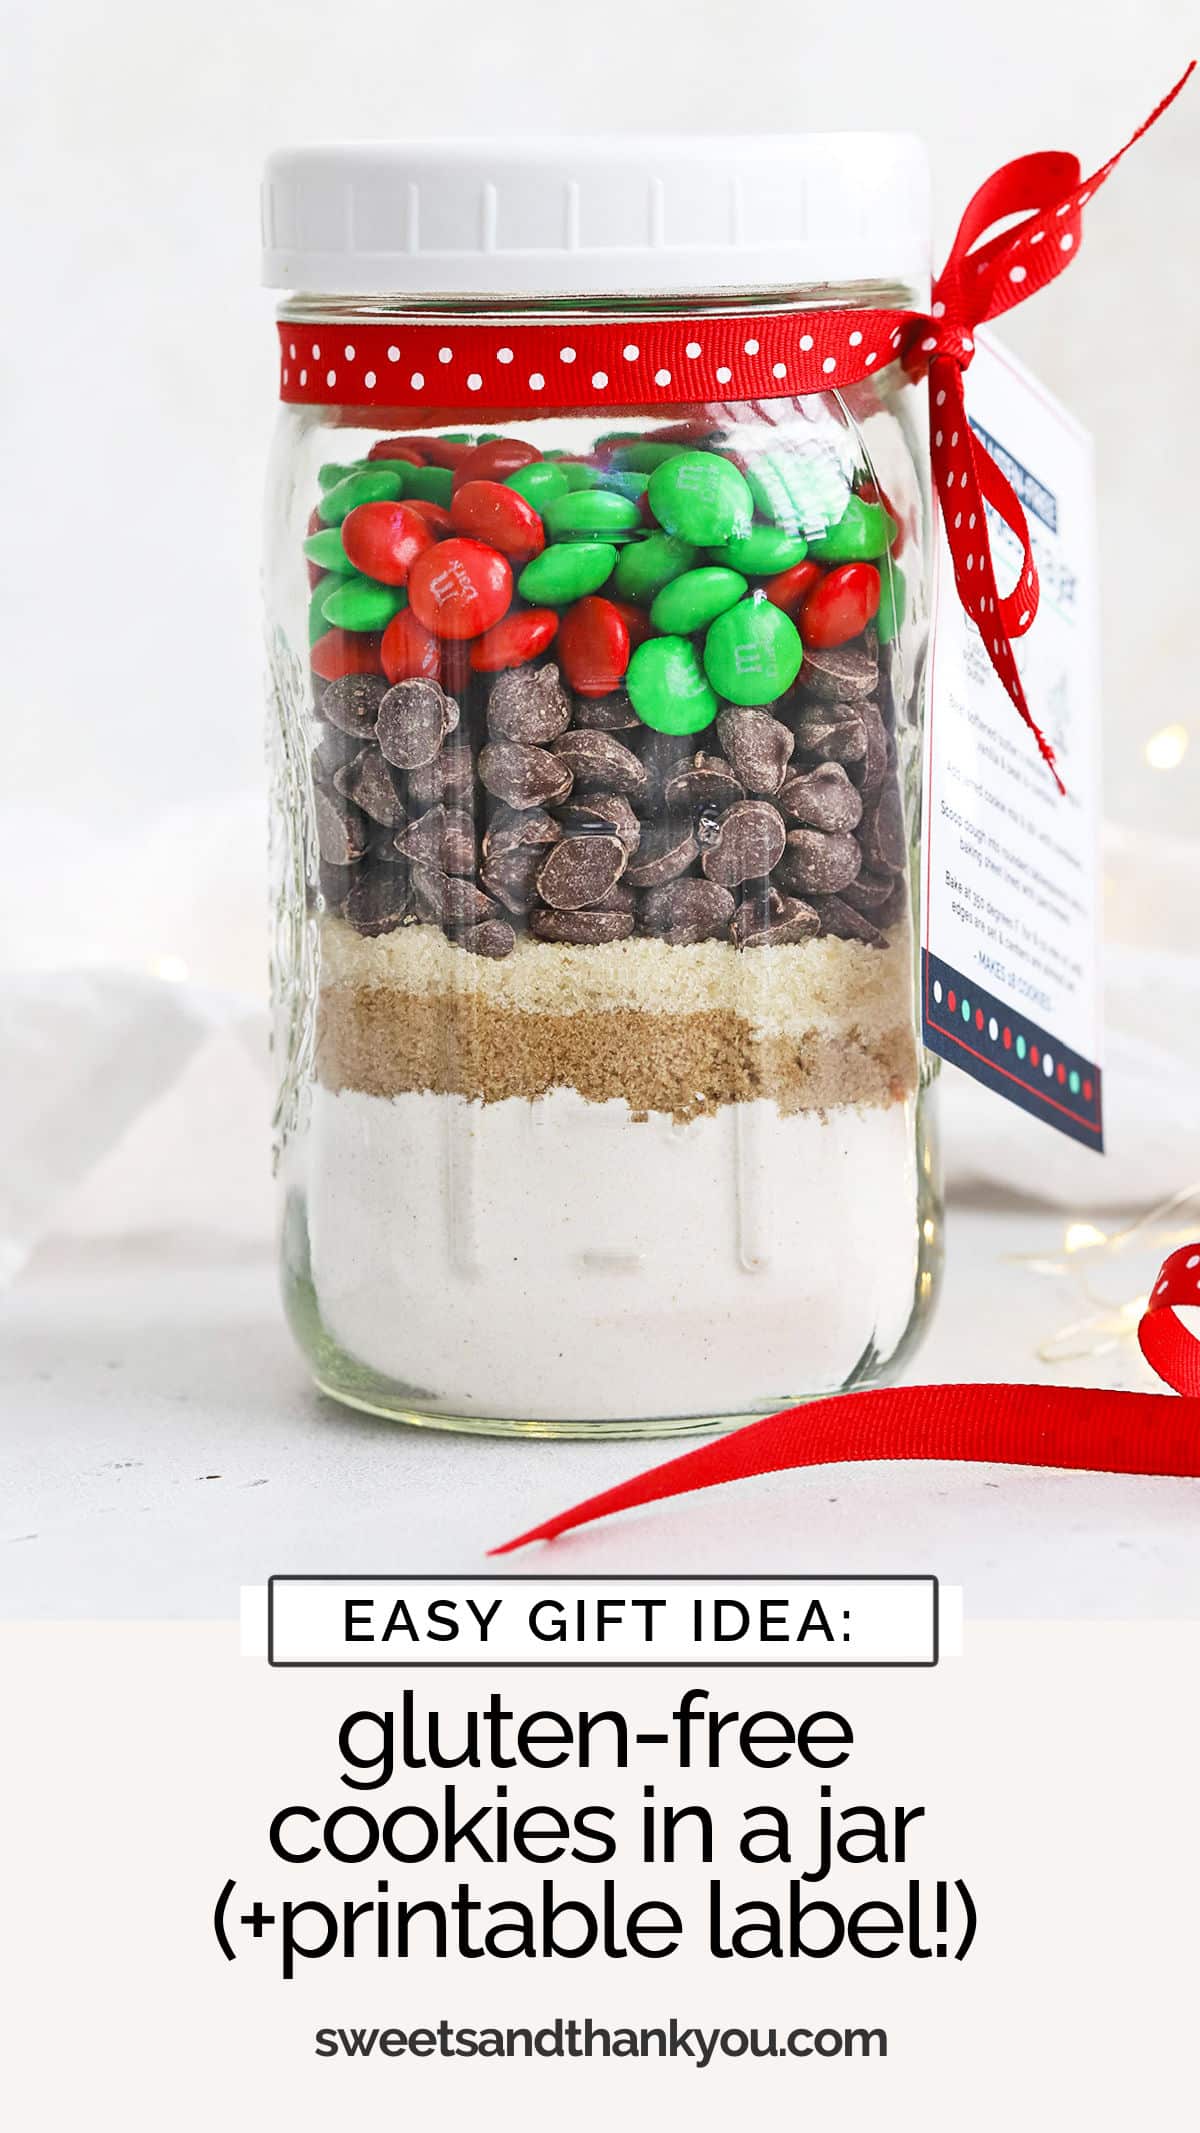 Gluten-Free Chocolate Chip Cookies In A Jar - Our gluten-free M&M cookies in a jar are a simple, delicious homemade gift you can make in minutes! Don't miss our free printable labels for gifting! // Gluten Free M&M Cookies // Gluten-Free Holiday Cookies // Cookies In a Jar With Labels // Labels For Cookies In A Jar // Gluten Free Cookie In a Jar Recipe